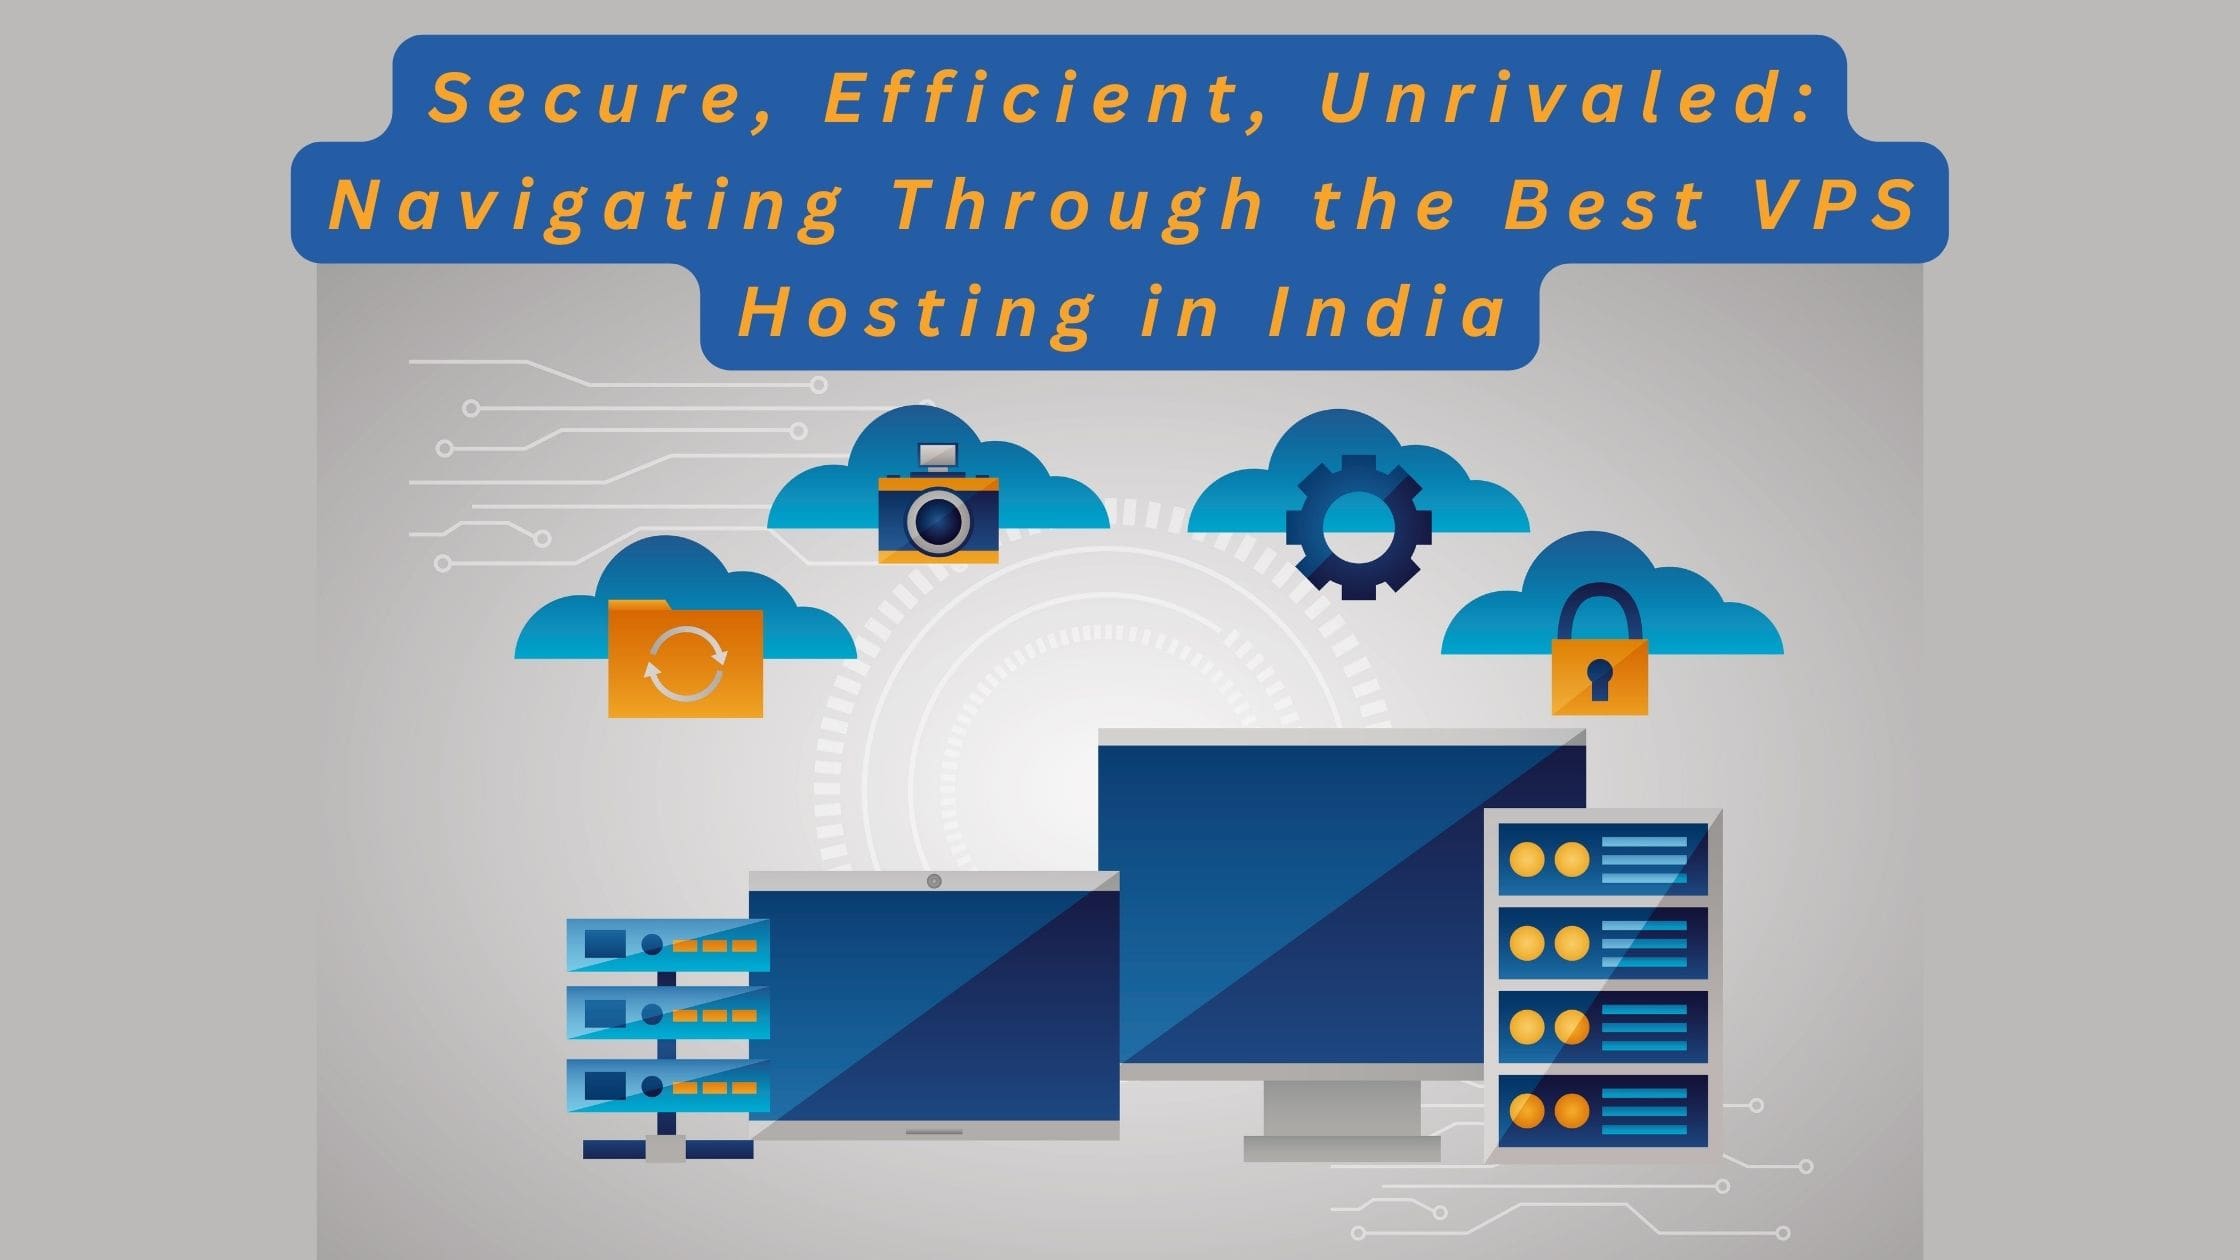 Secure, Efficient, Unrivaled: Navigating Through the Best VPS Hosting in India